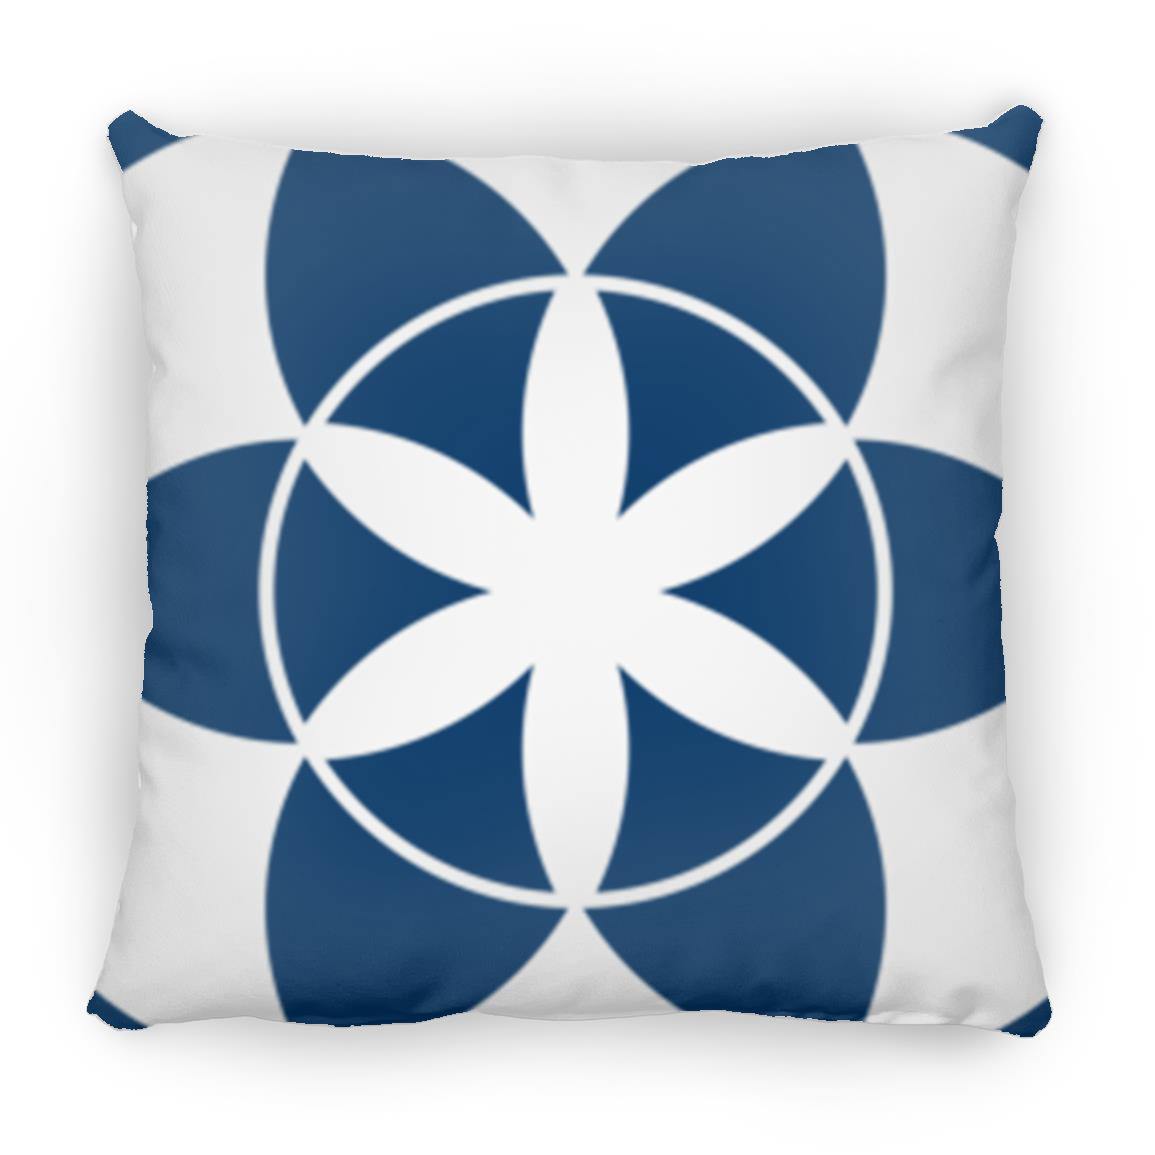 Crop Circle Pillow - West Knoyle - Shapes of Wisdom